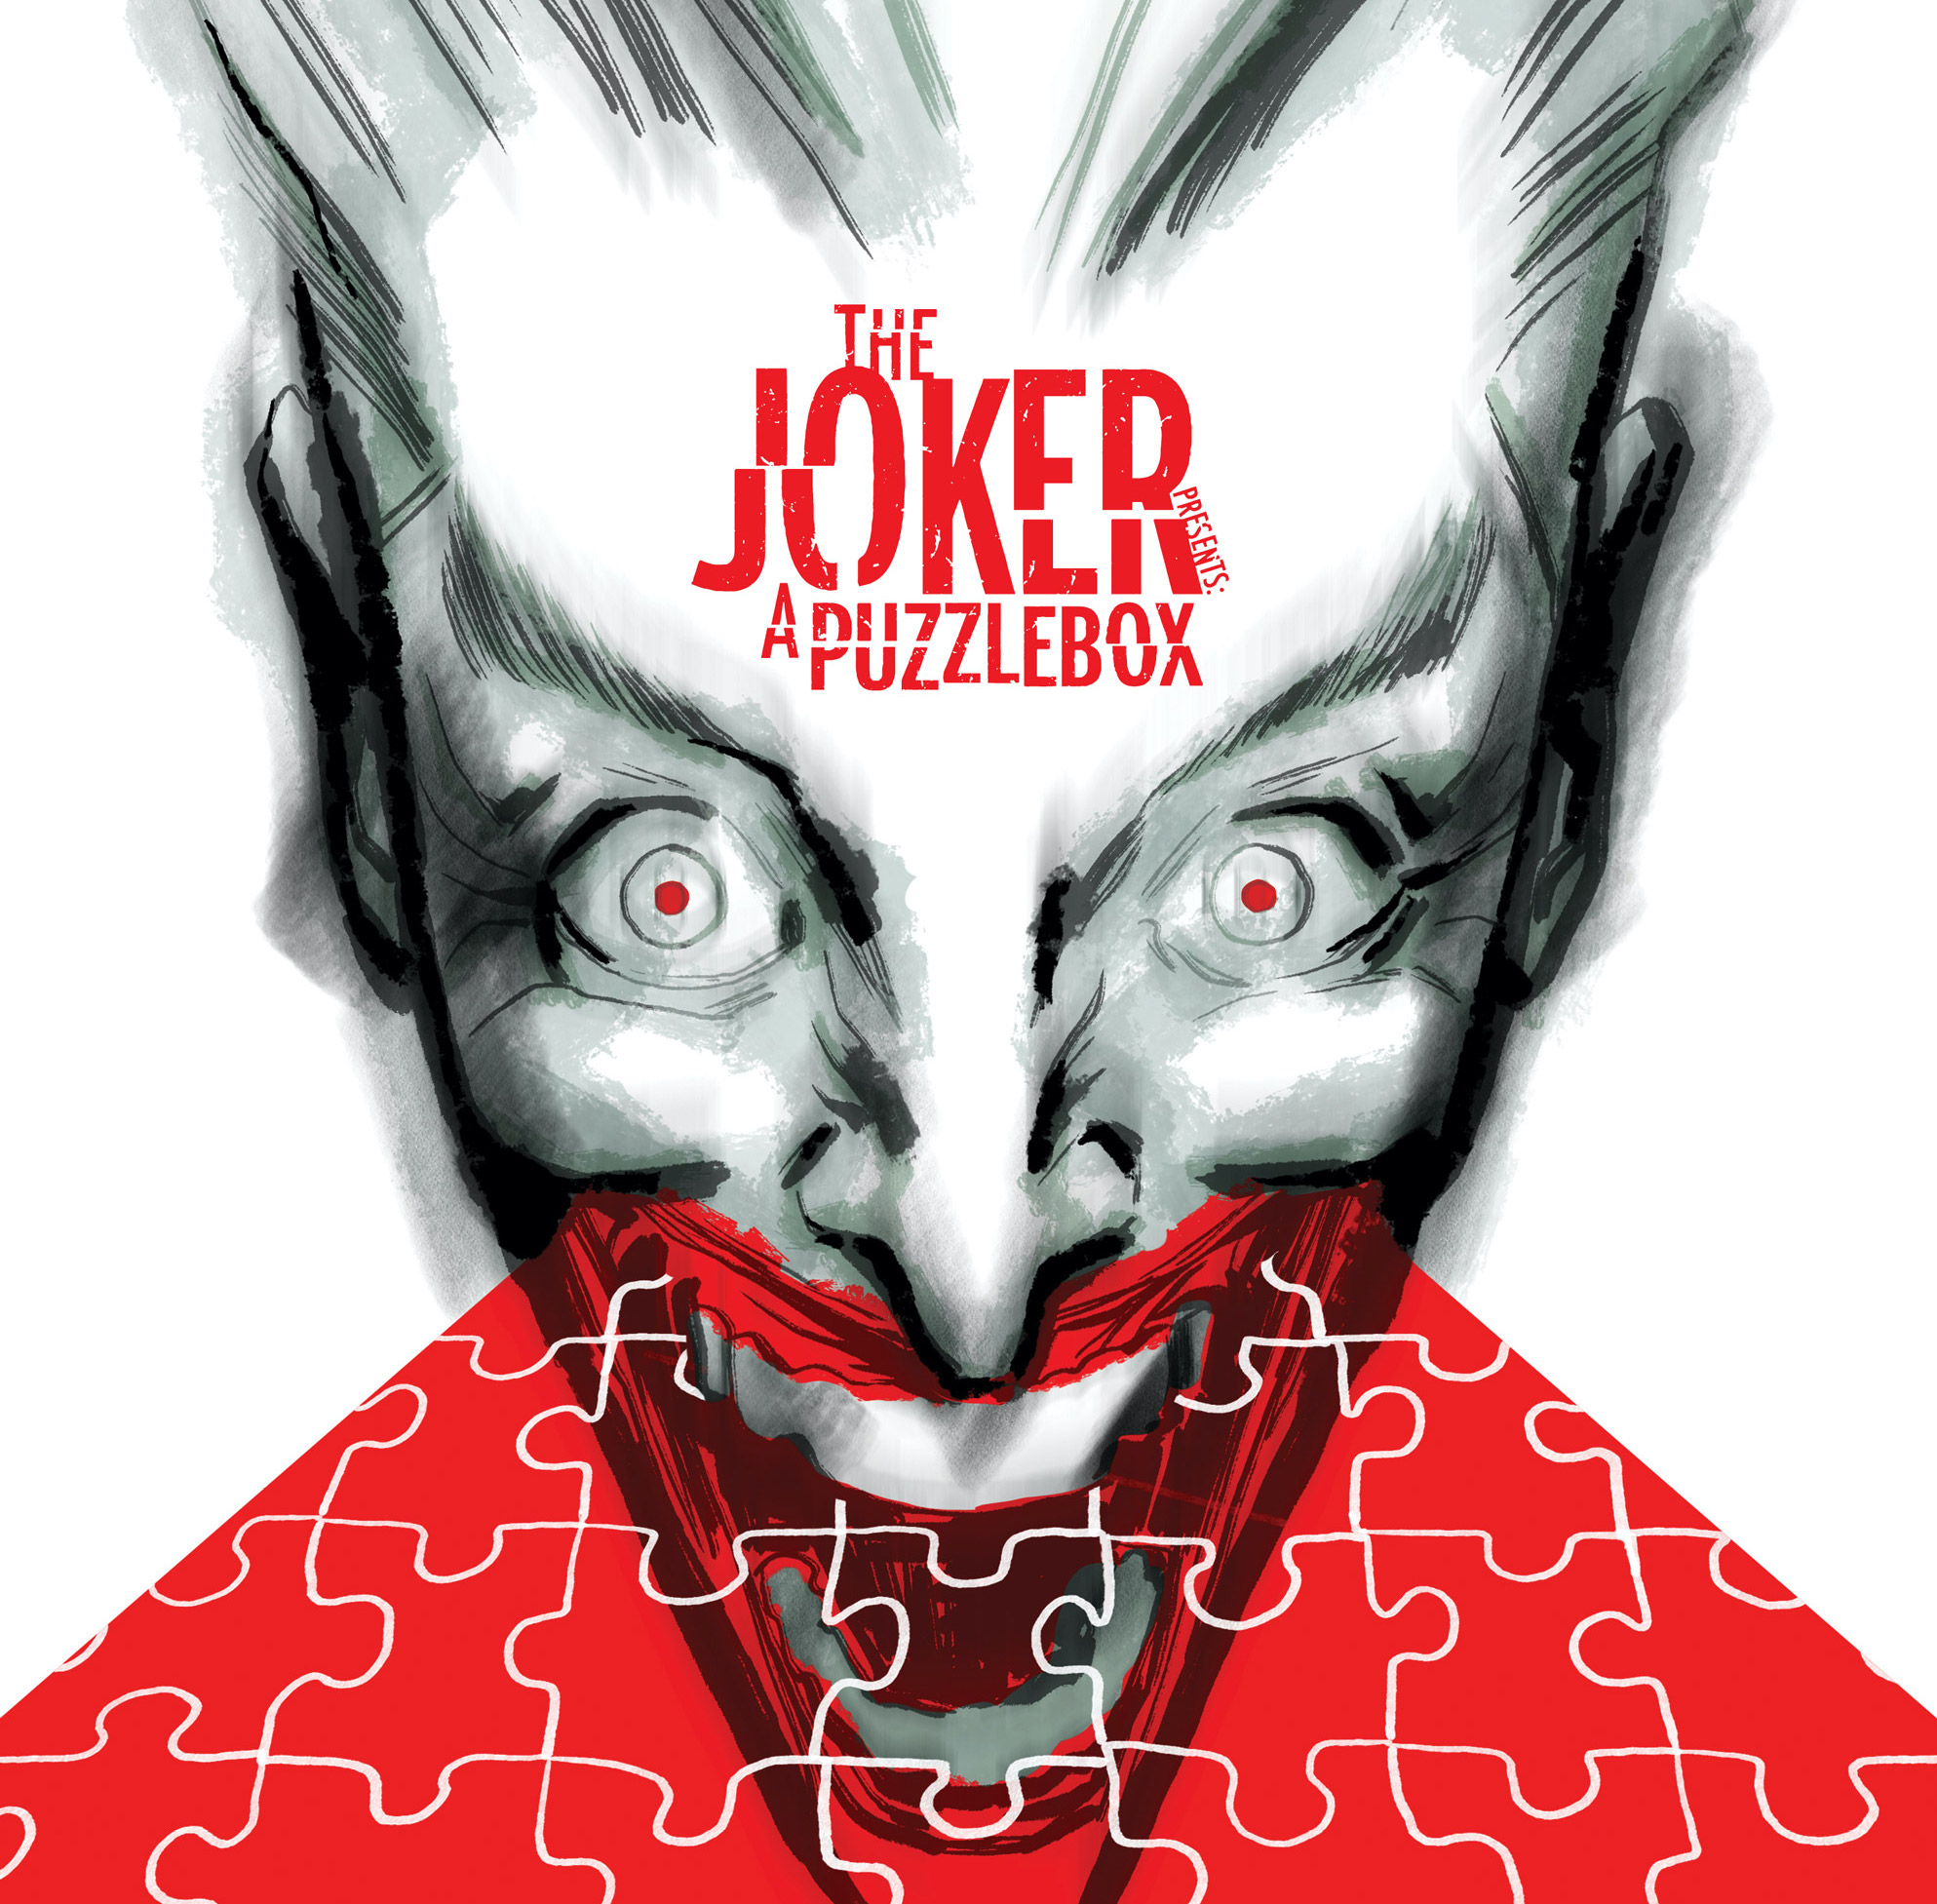 'The Joker Presents: A Puzzlebox' has a clever unreliable narrator spin